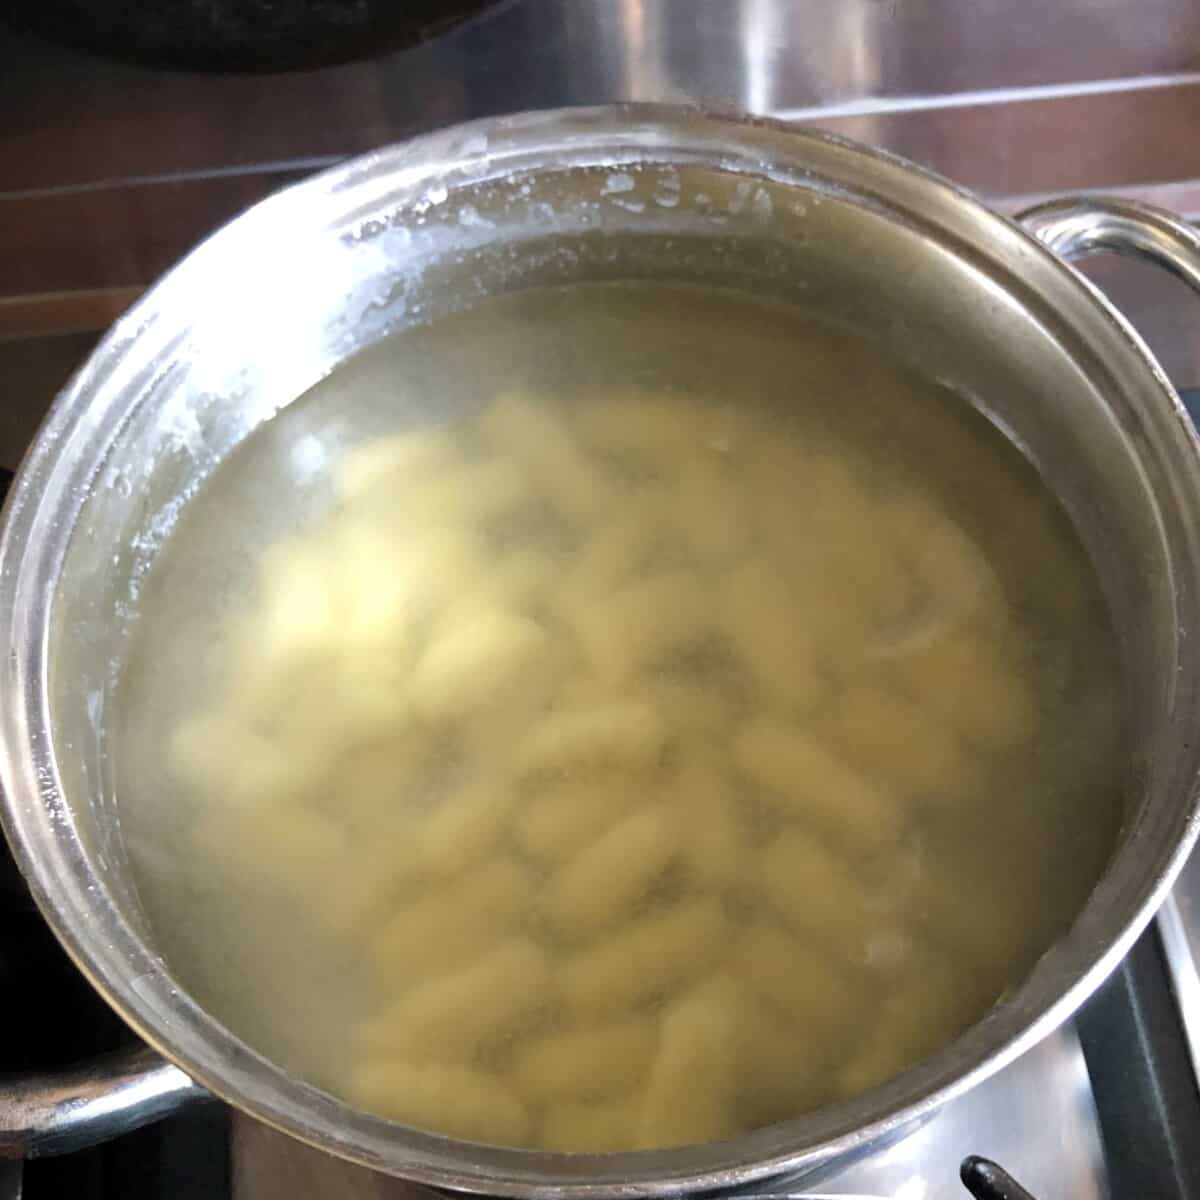 00 flour potato gnocchi added to a small pot of boiling salted water to cook (currently the gnocchi are at the bottom of the water)